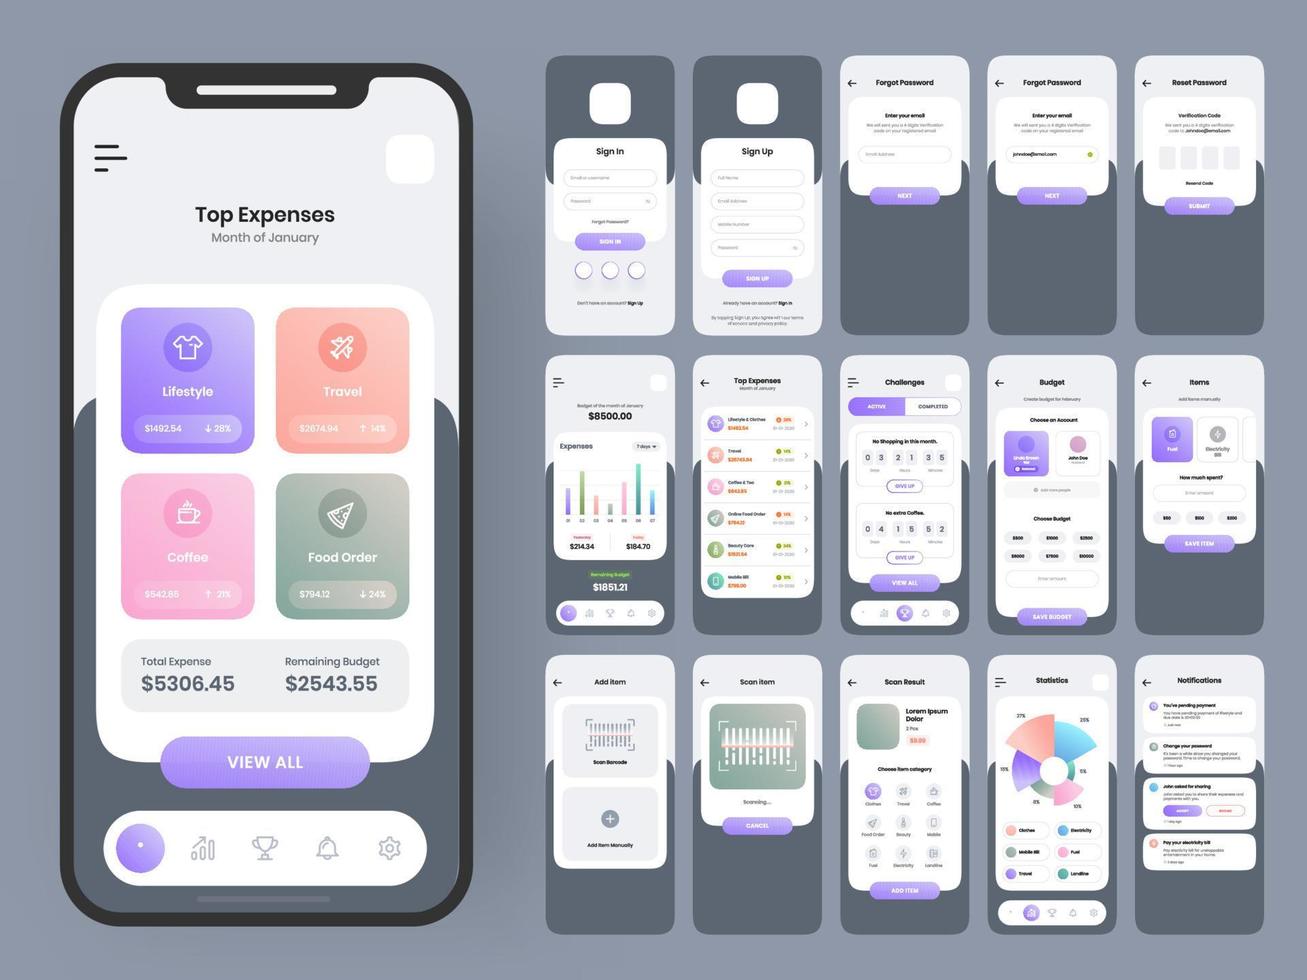 Mobile App Ui Kits with Different GUI Layout Including Sign in, Sign Up, Forgot, Reset Password, Top Expenses and Trading Screens. vector